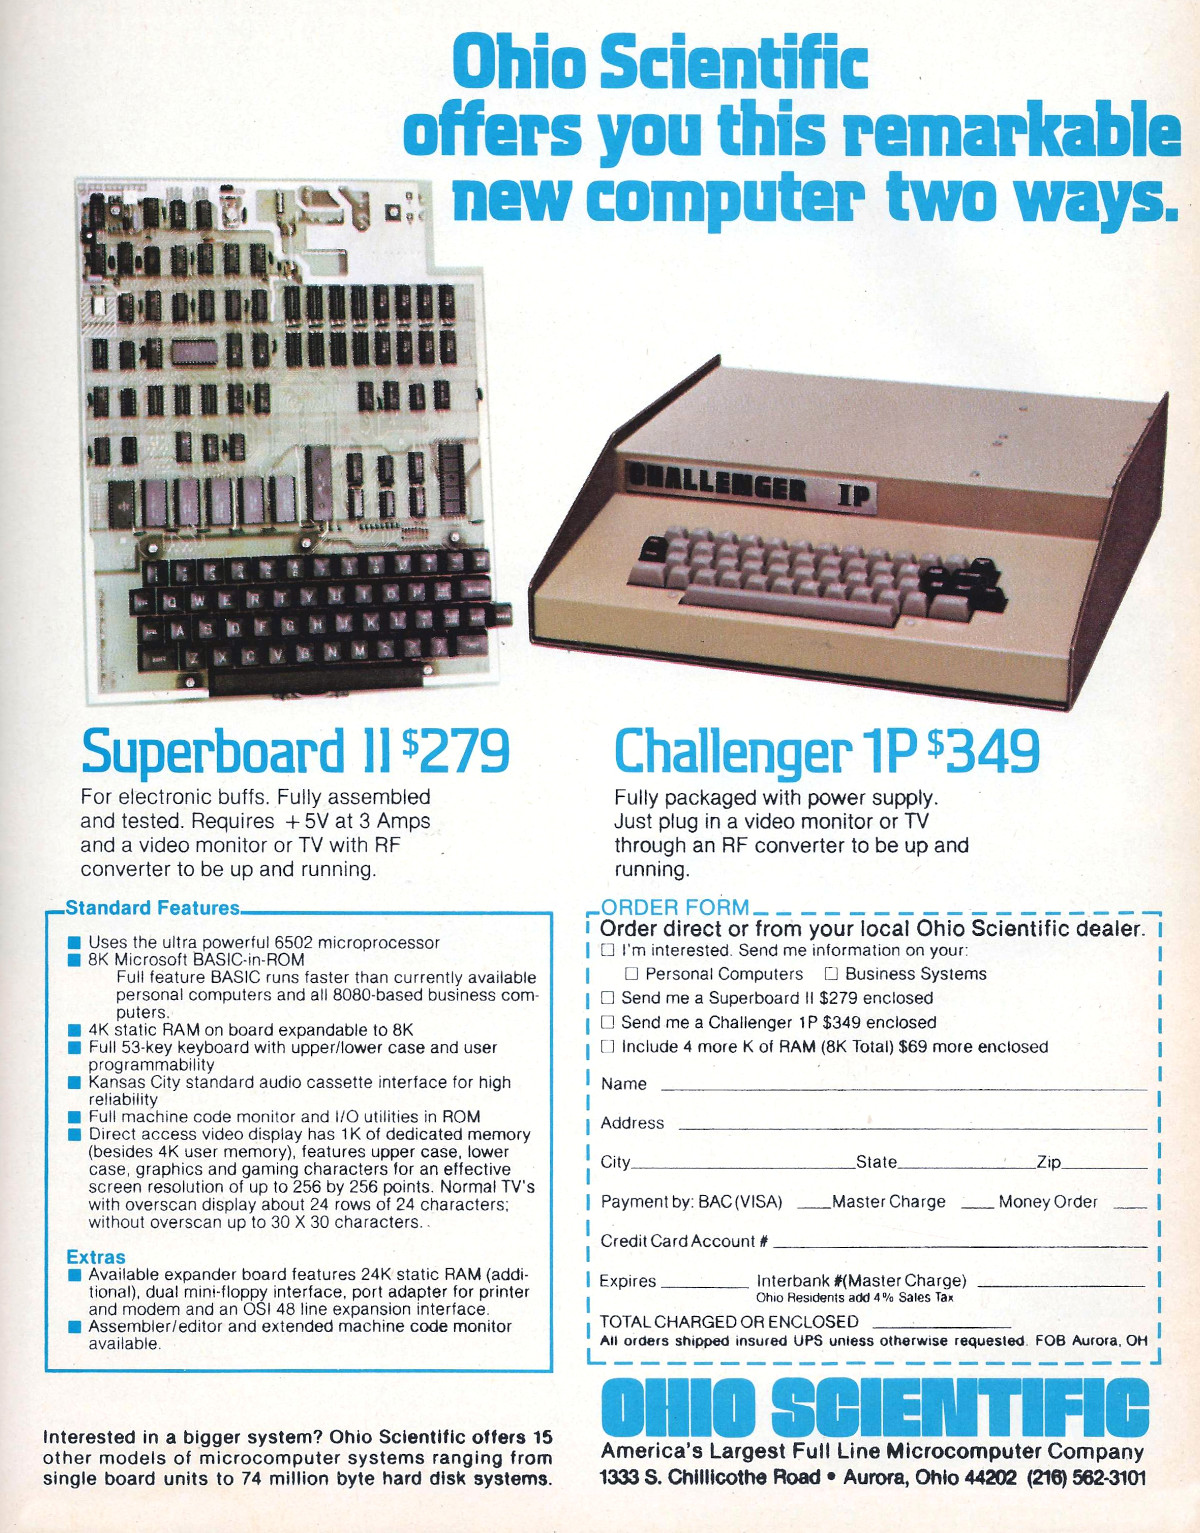 Ohio's Superboard II - the basis of many of the company's microcomputers. From Byte, December 1978